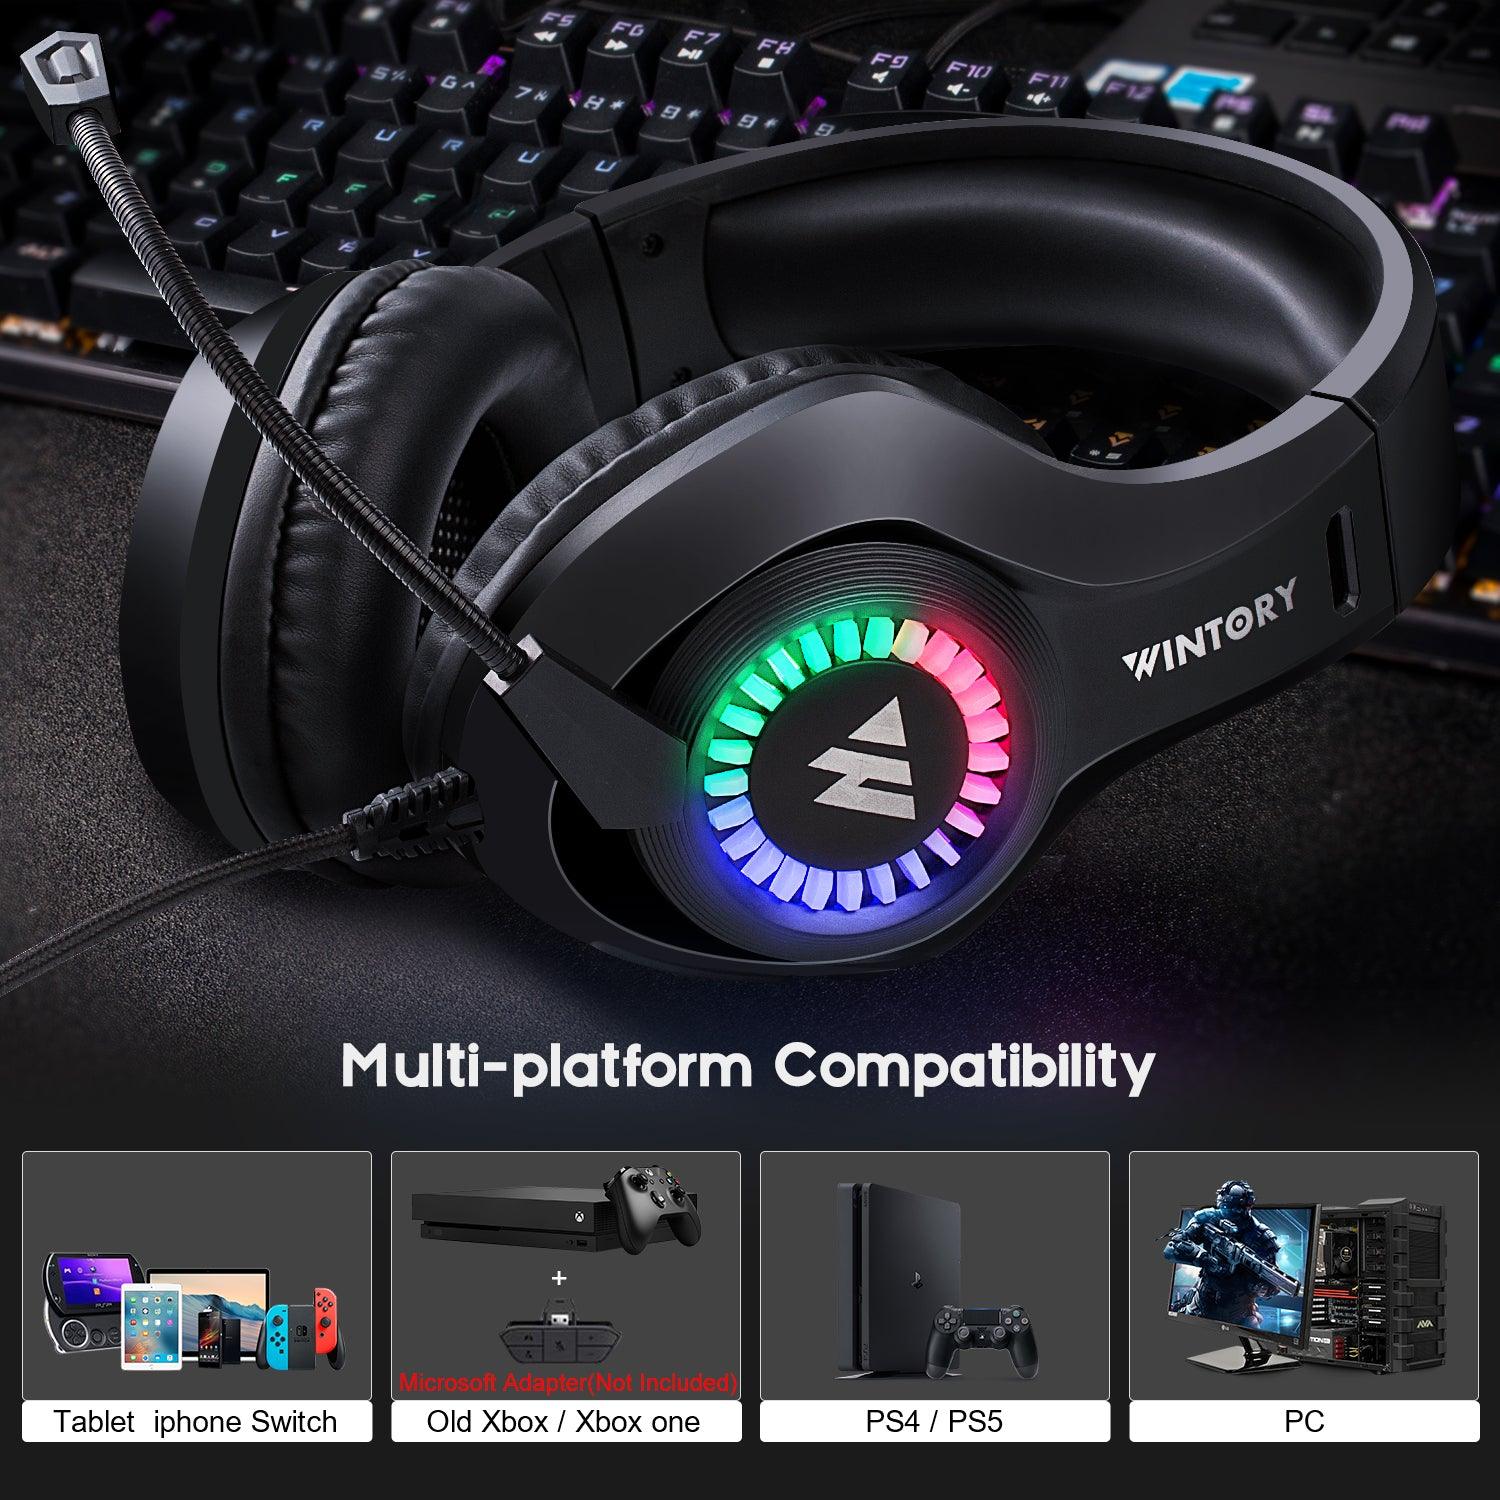 Exclusive model  Wintory M3 Gaming Headset Wintory